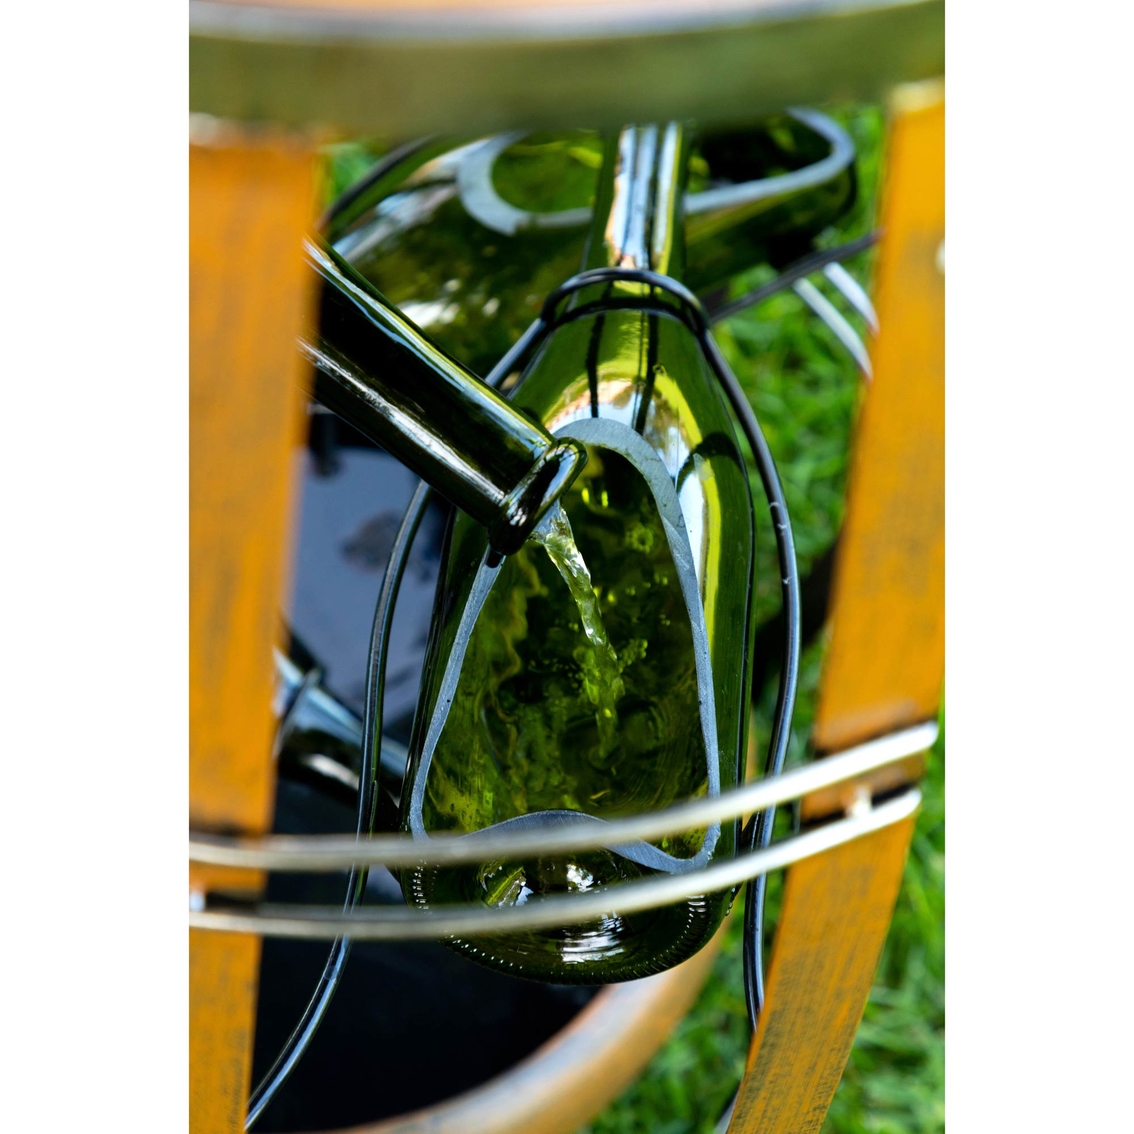 Alpine Metal Fountain with Tiered Glass Bottles - Image 6 of 6